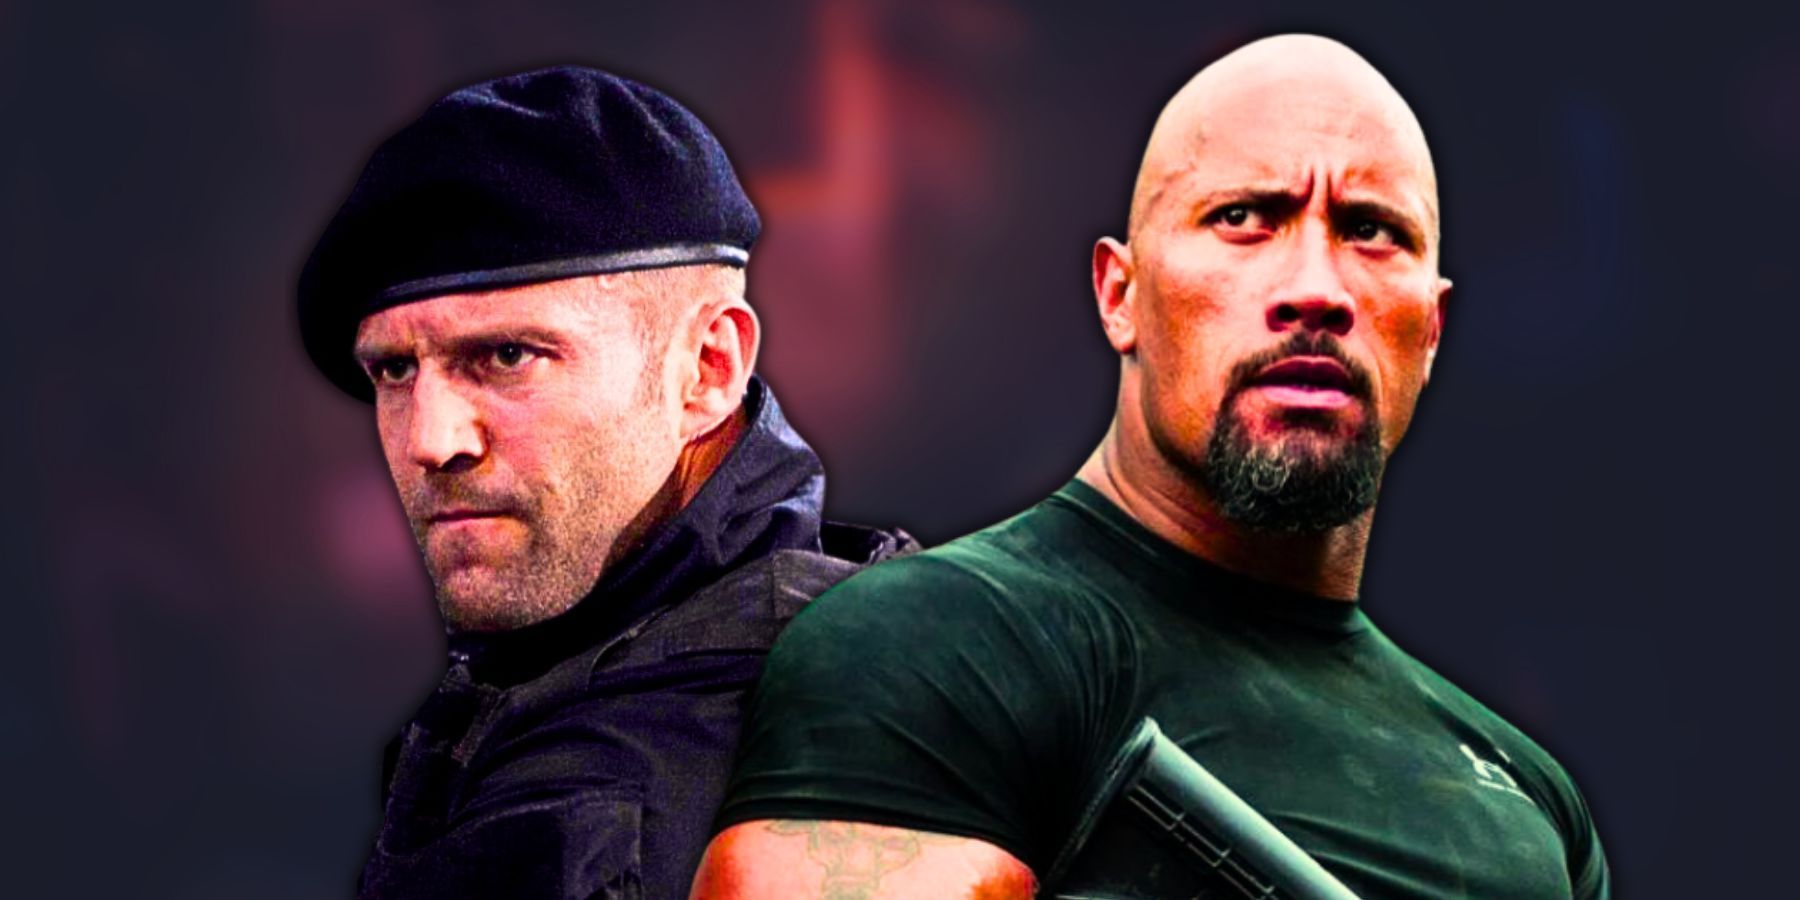 Jason Statham vs The Rock, Expendables and Fast and Furious